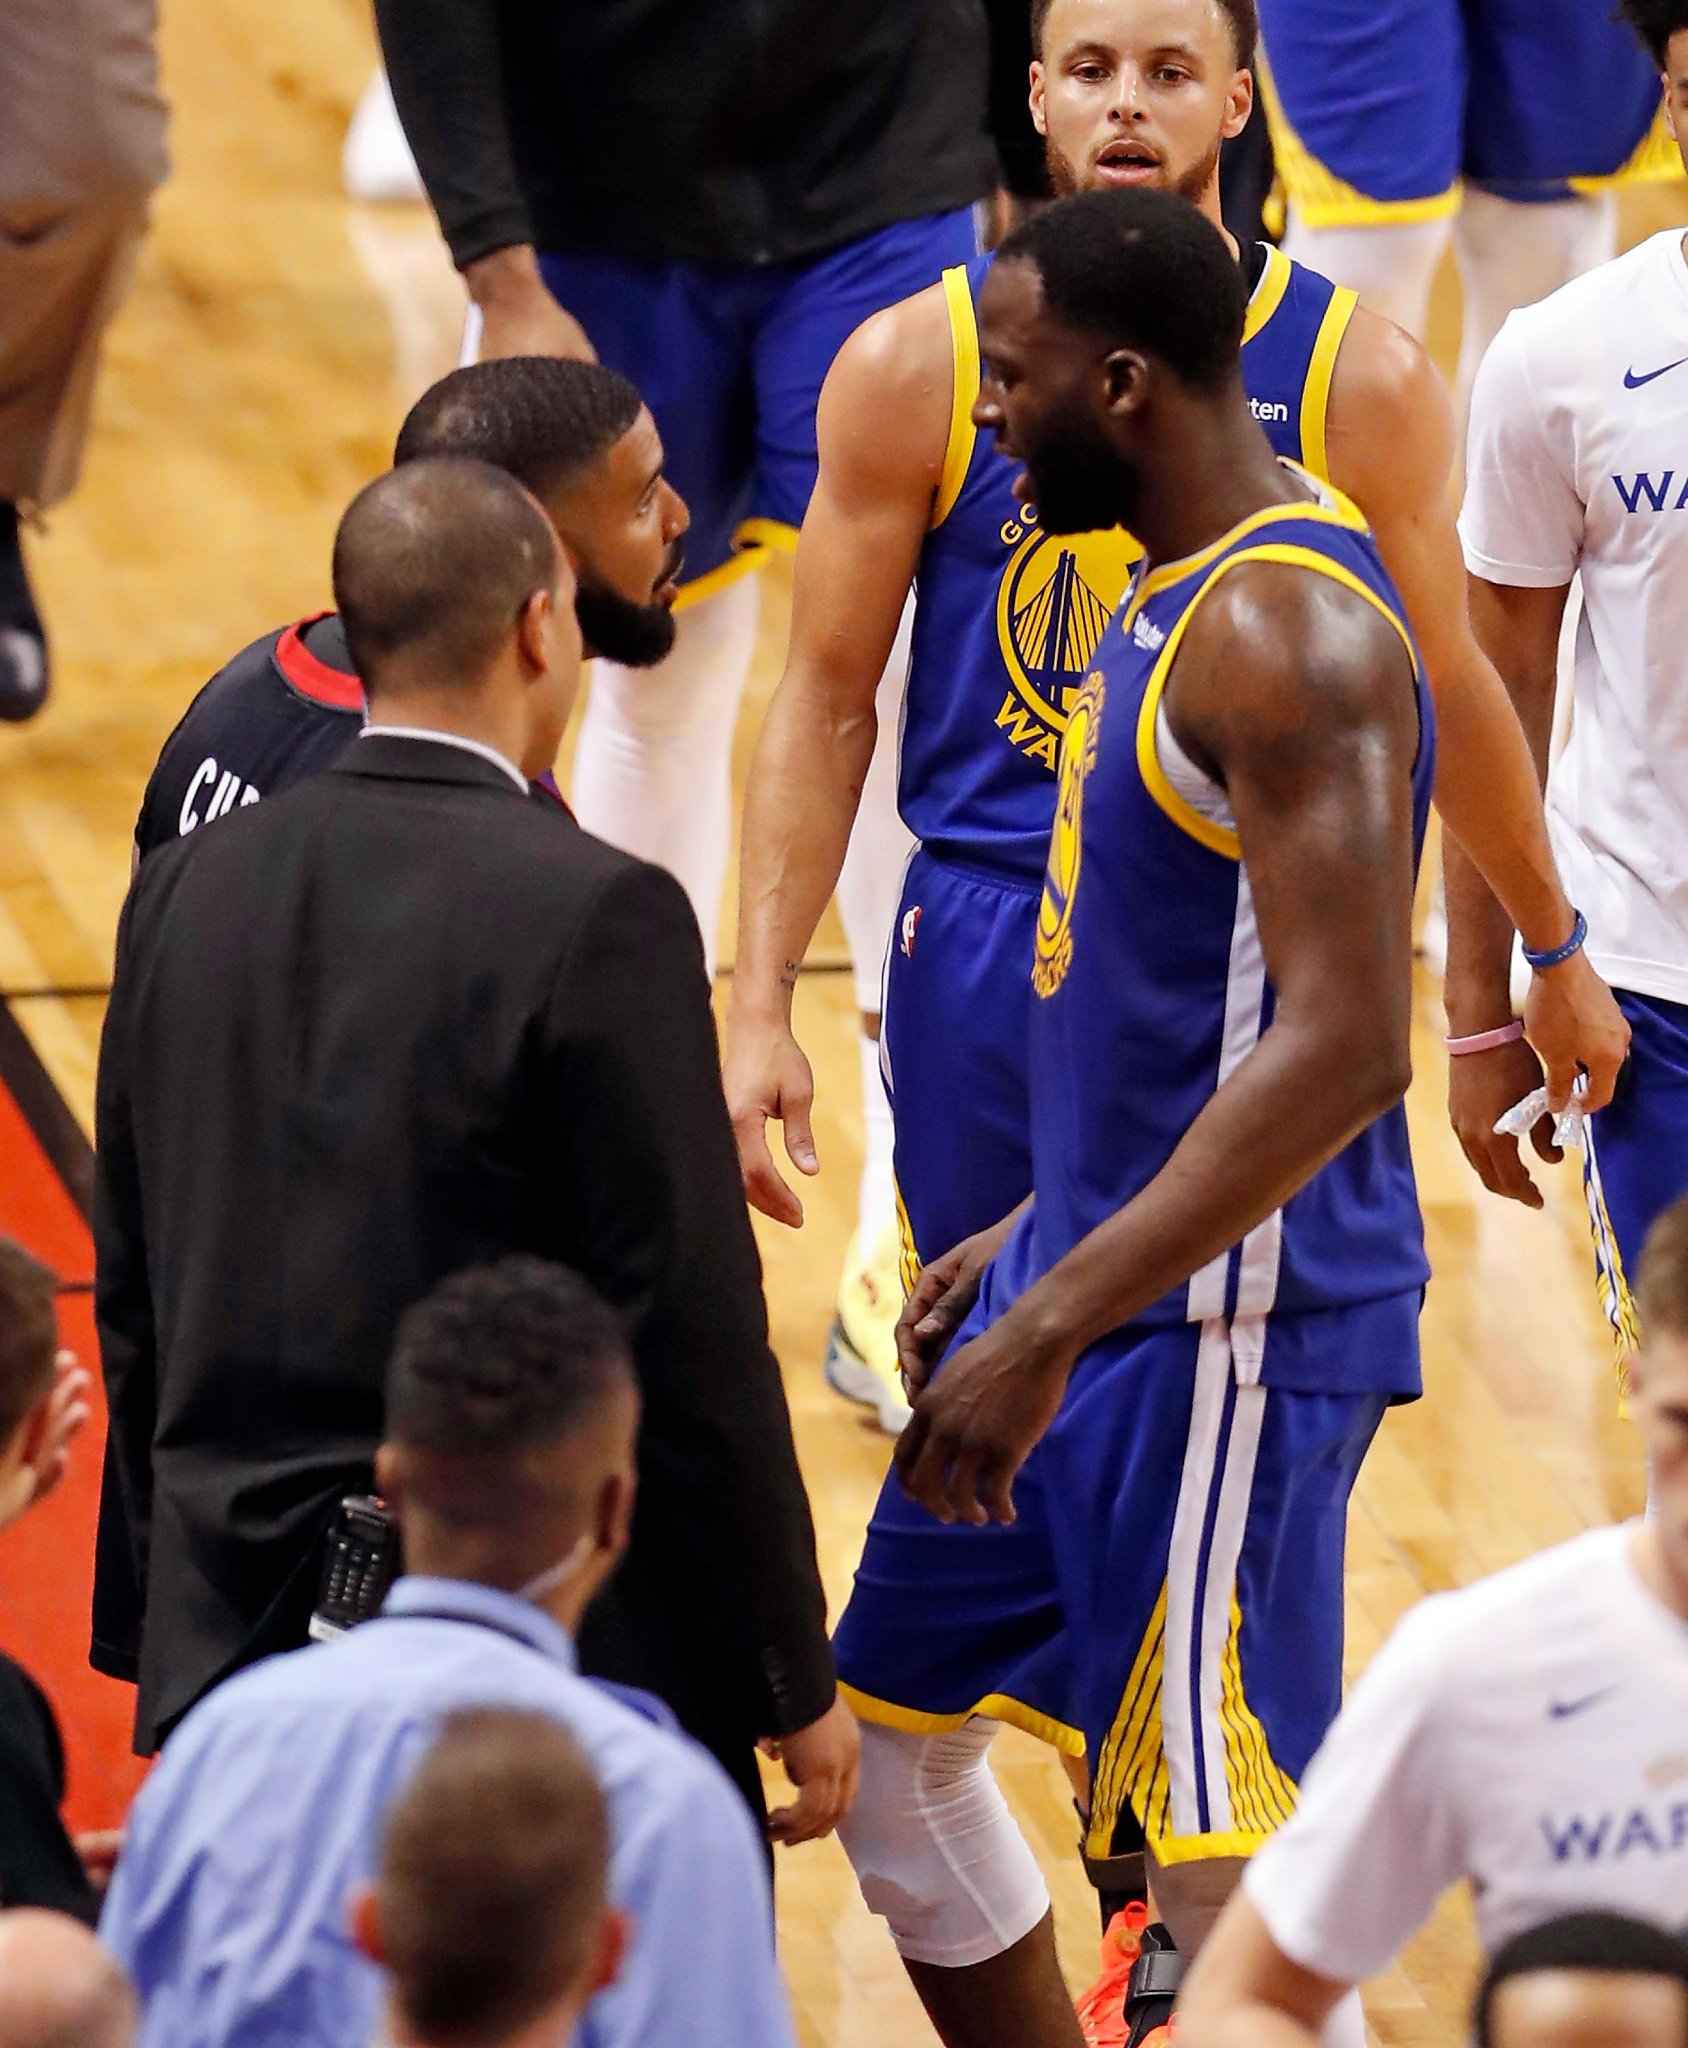 Watch: Drake, Draymond Green have heated exchange after Game 1